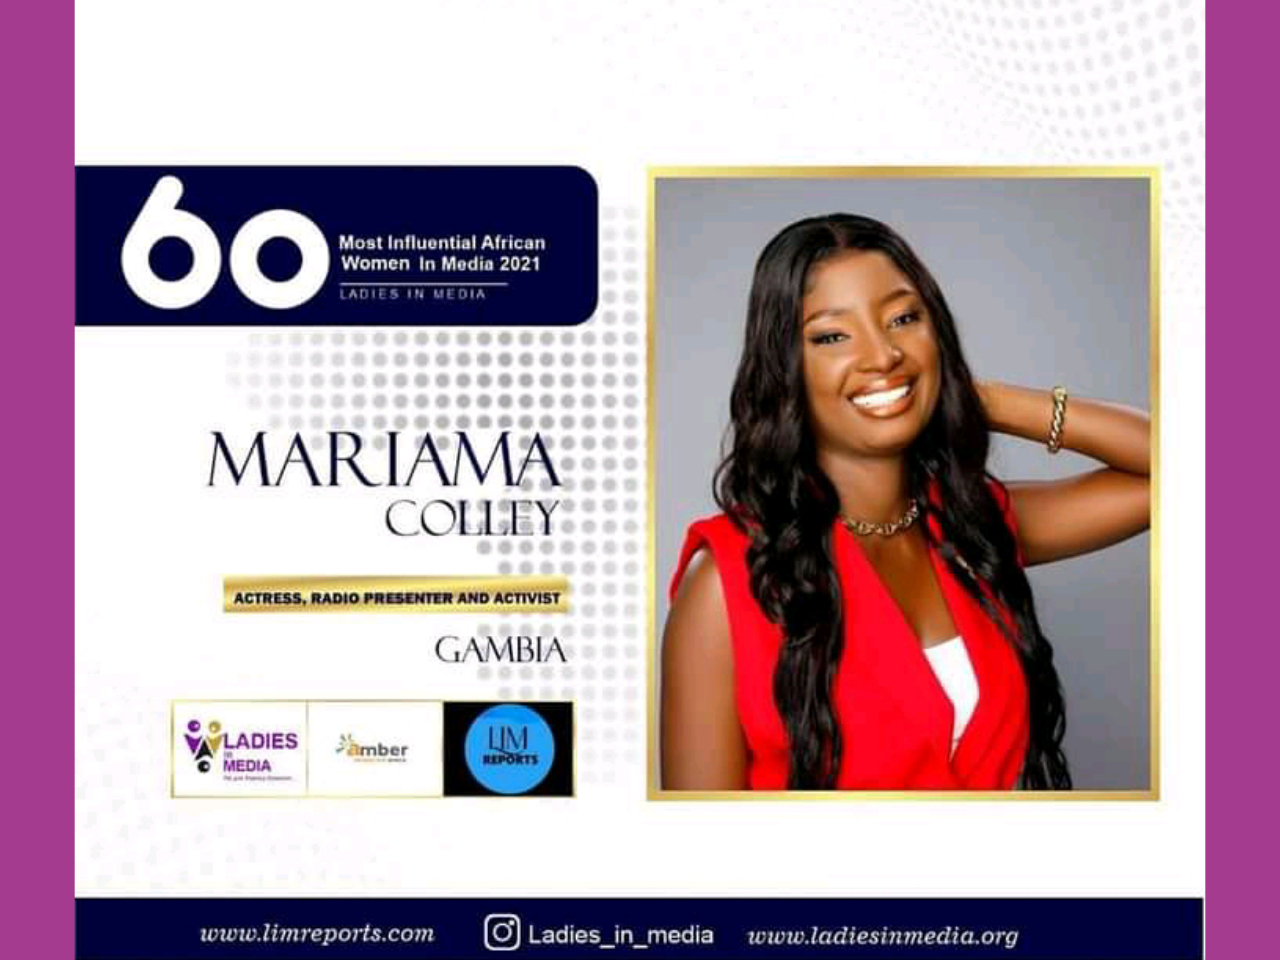 Mariama Colley - Influential Gambian Woman in Media